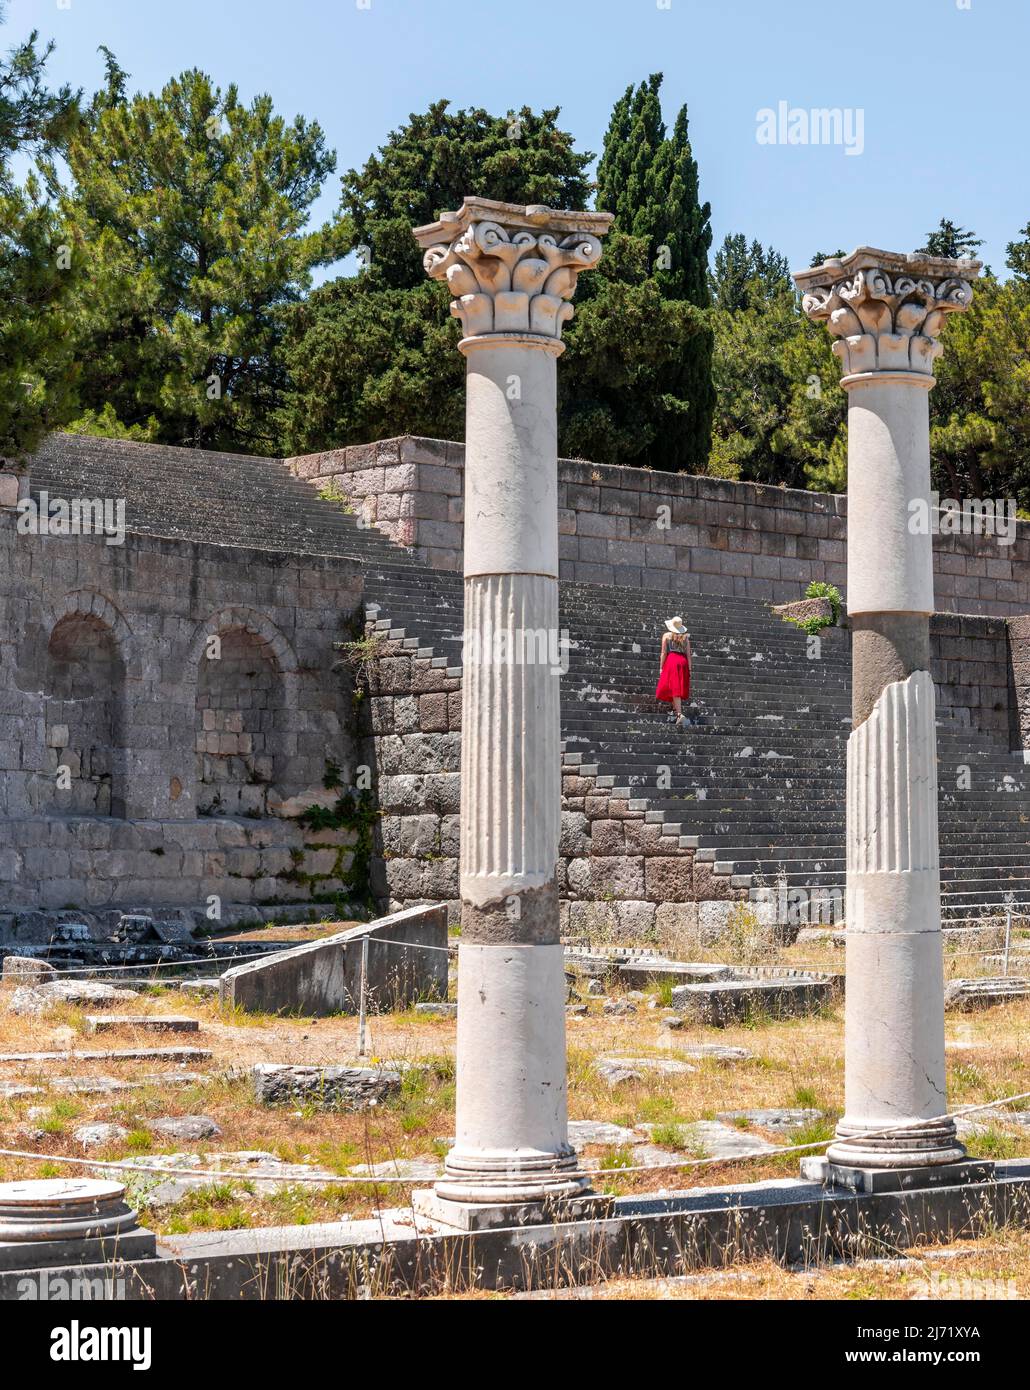 Tourist on stairs, Ruins with columns, Former temple, Asklepieion, Kos, Dodecanese, Greece Stock Photo